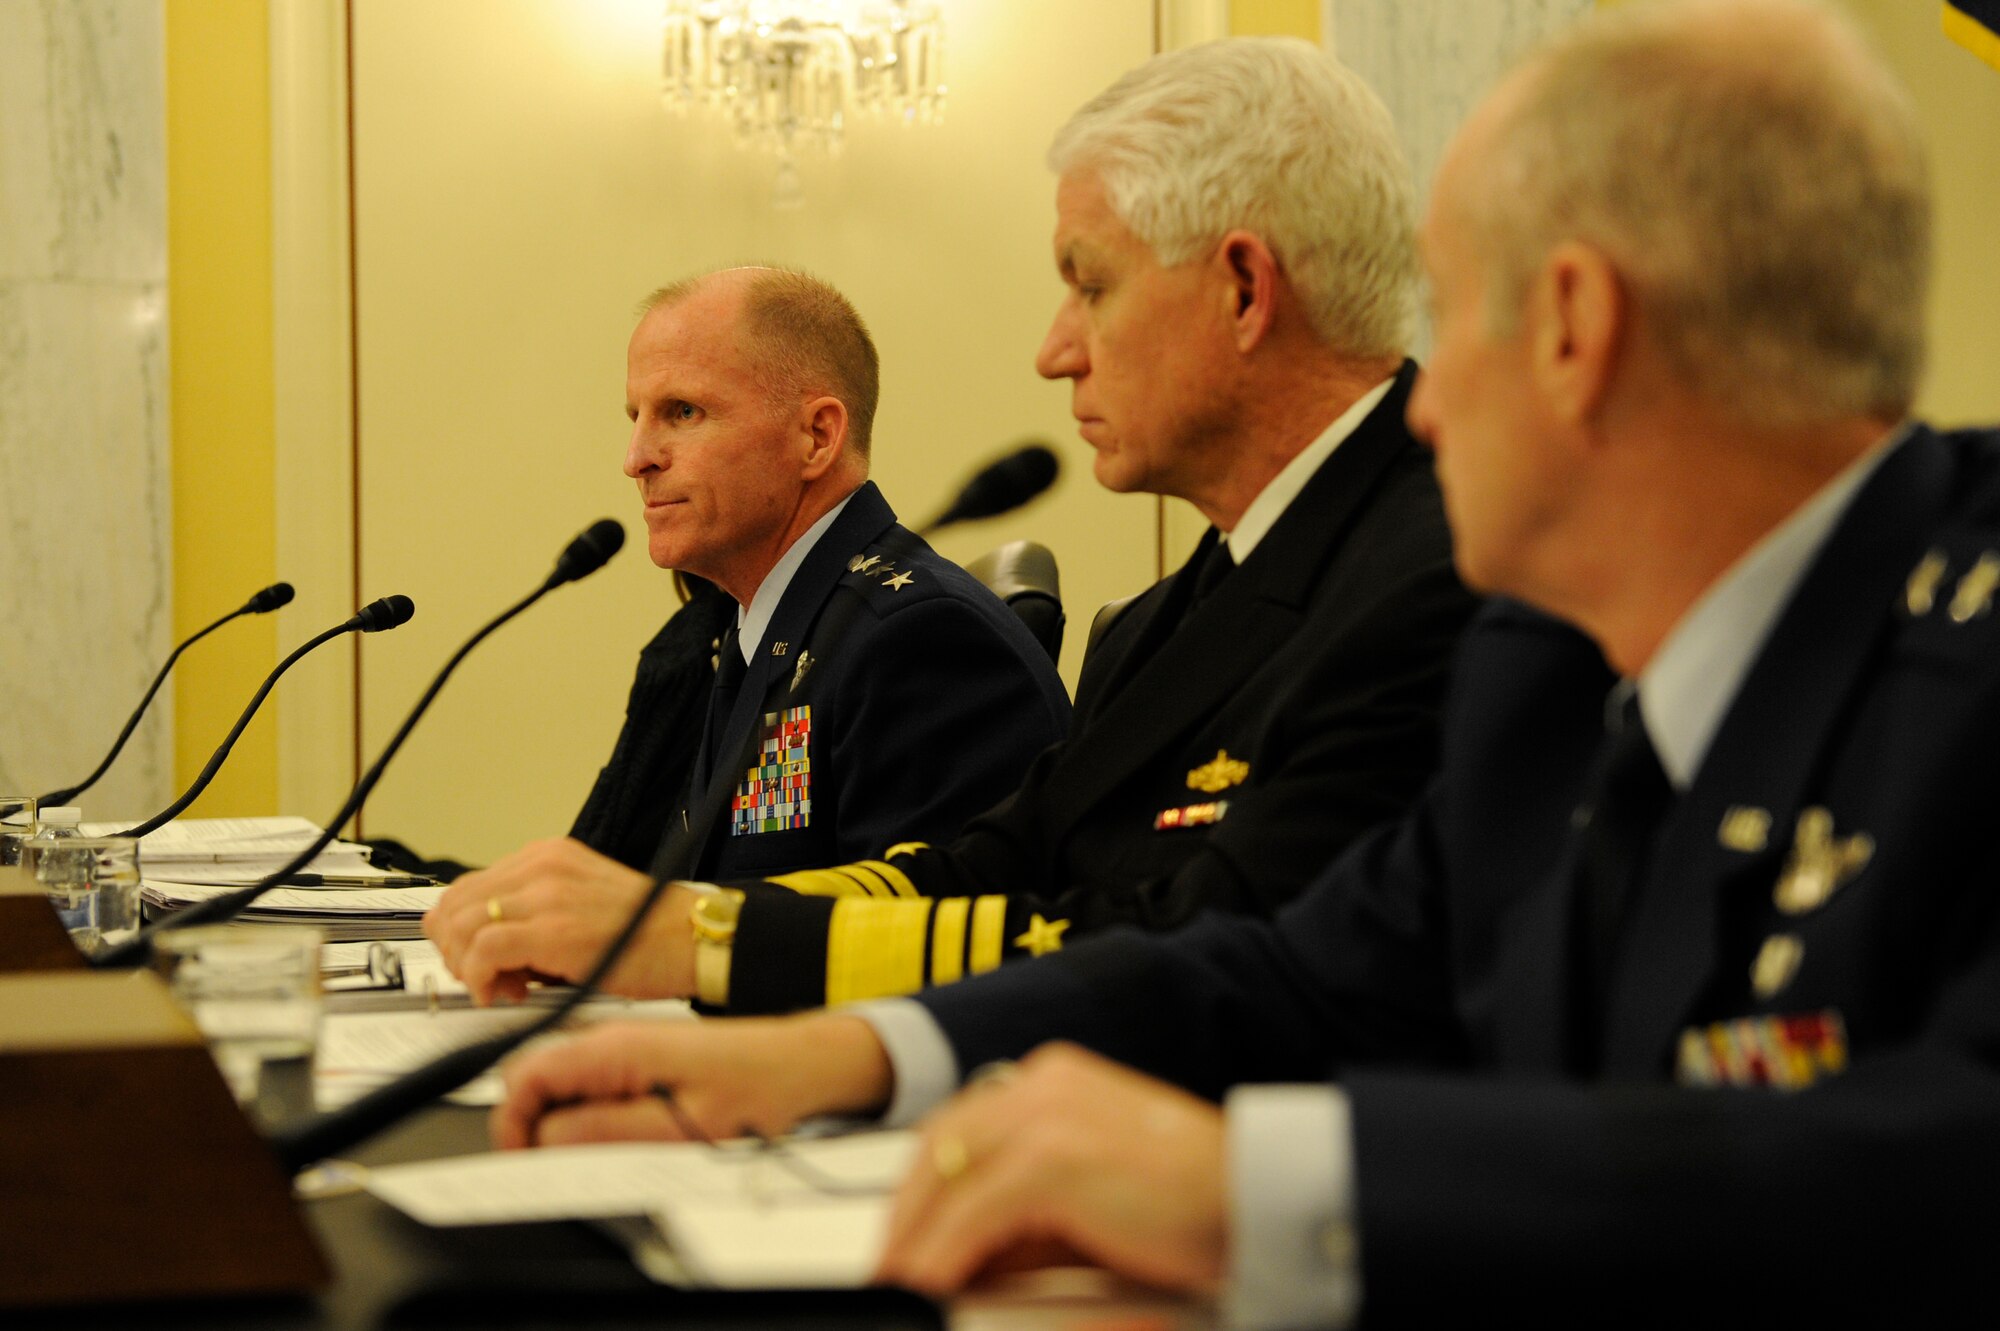 Lt. Gen. Stephen Wilson, Air Force Global Strike Command commander, testifies before the Senate Armed Service Committee’s Subcommittee on Strategic Forces, March 5. Wilson appeared before the subcommittee to answer questions regarding nuclear forces and policies in review of the Defense Authorization Request for Fiscal Year 2015 and the Future Years Defense Program.  (U.S. Air Force photo by Staff Sgt. Carlin Leslie)